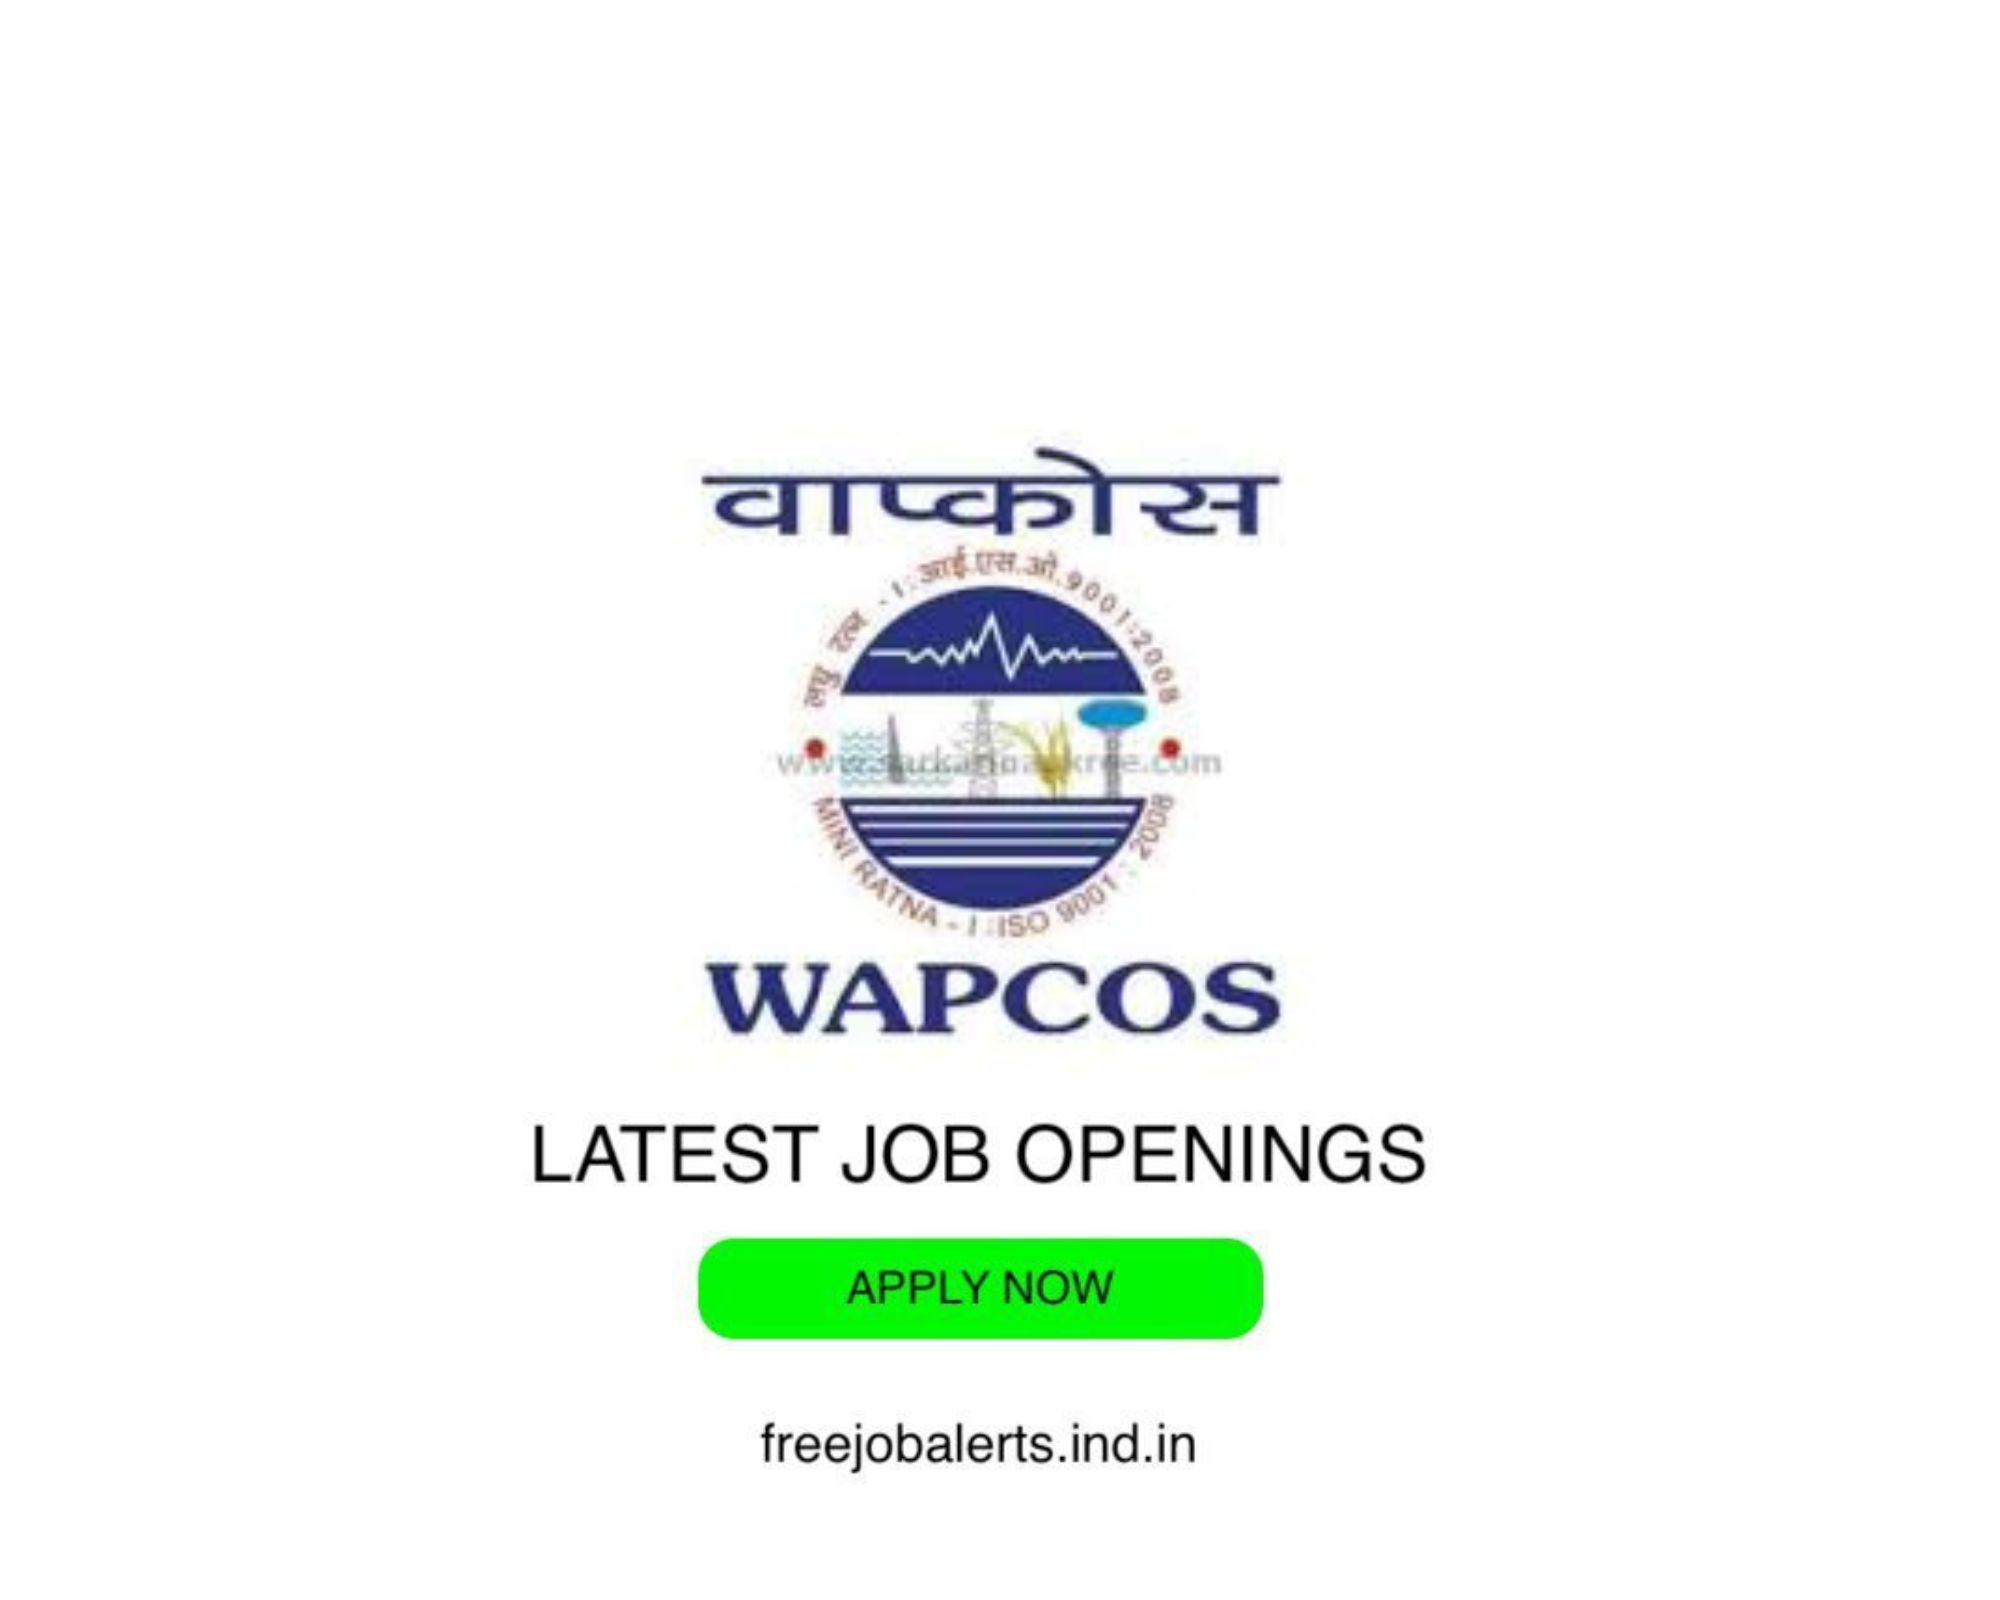 WAPCOS - Water and Power Consultancy Service Limited - Latest Govt job openings - Free job alerts, Indian Govt Jobs